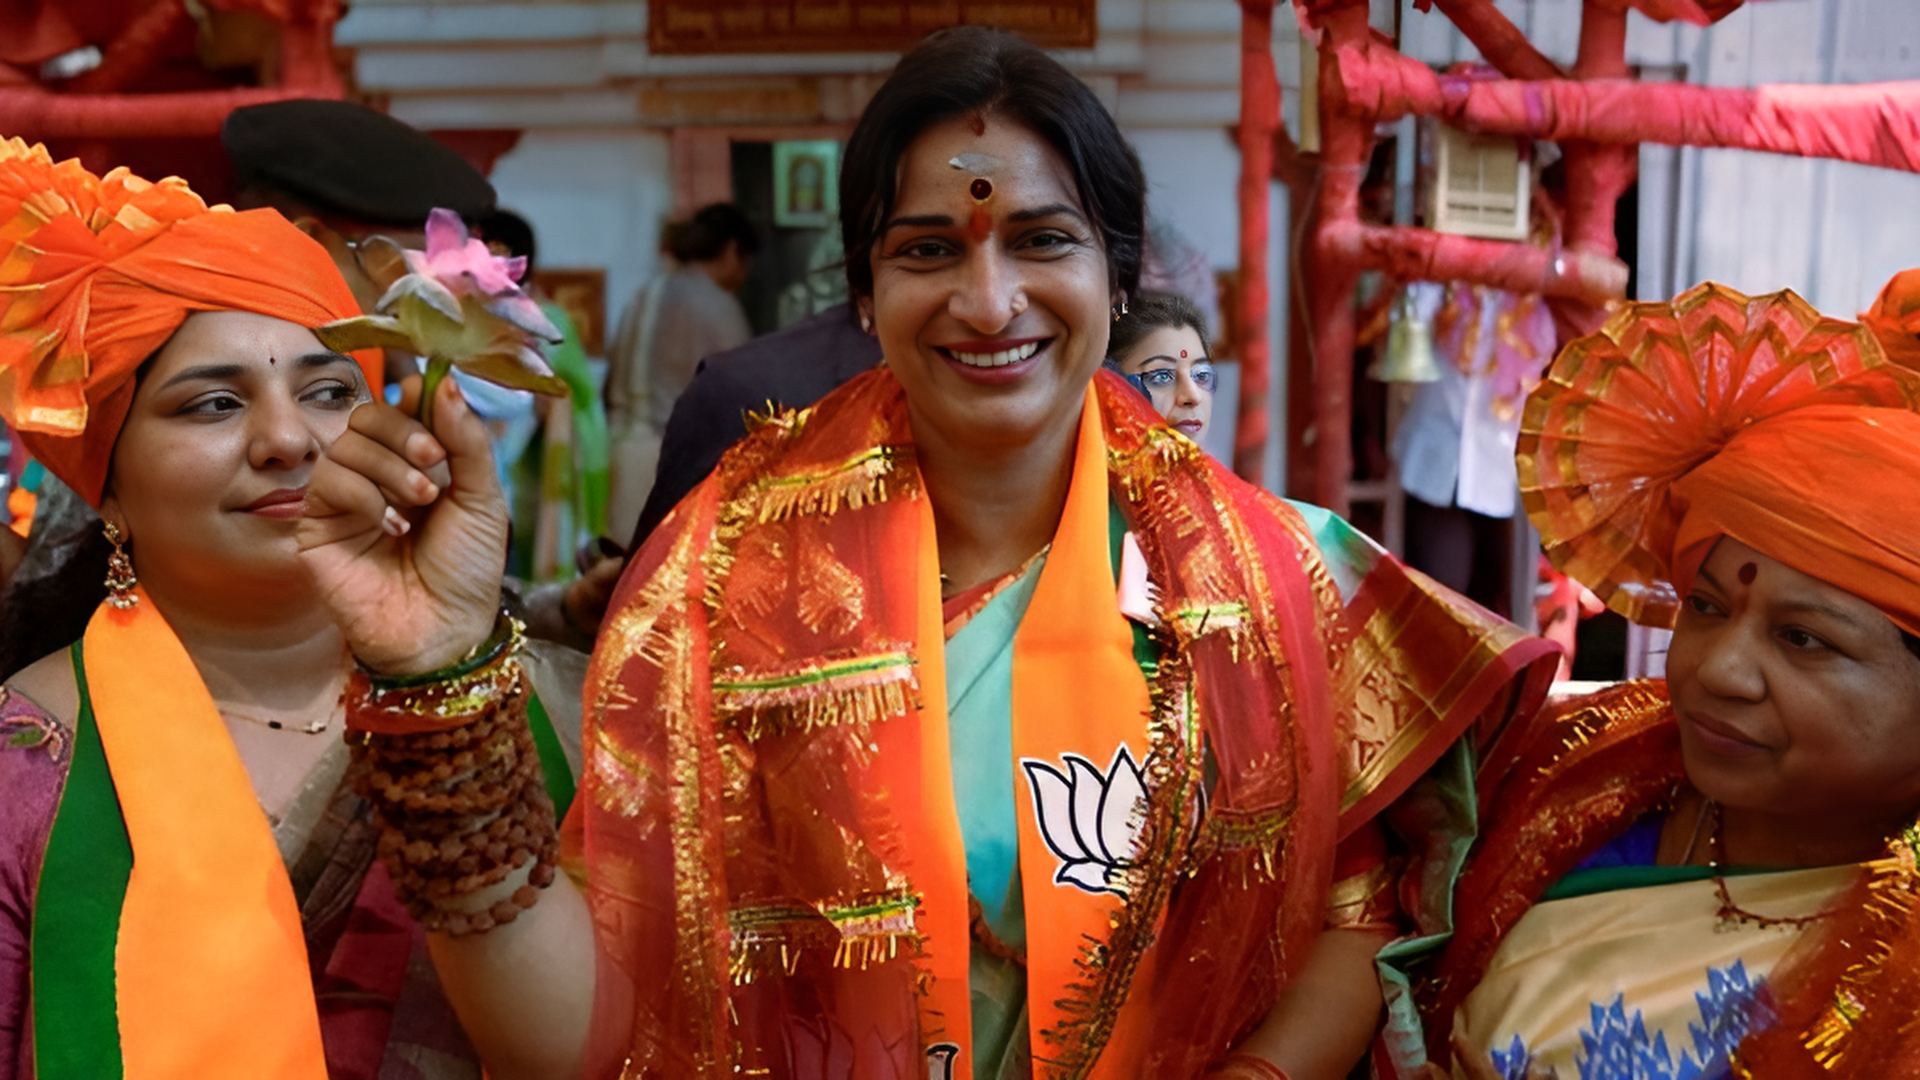 BJP’s Hyderabad Candidate Madhavi Latha Faces Controversy, Verifies Identity Removing ‘Burqa’